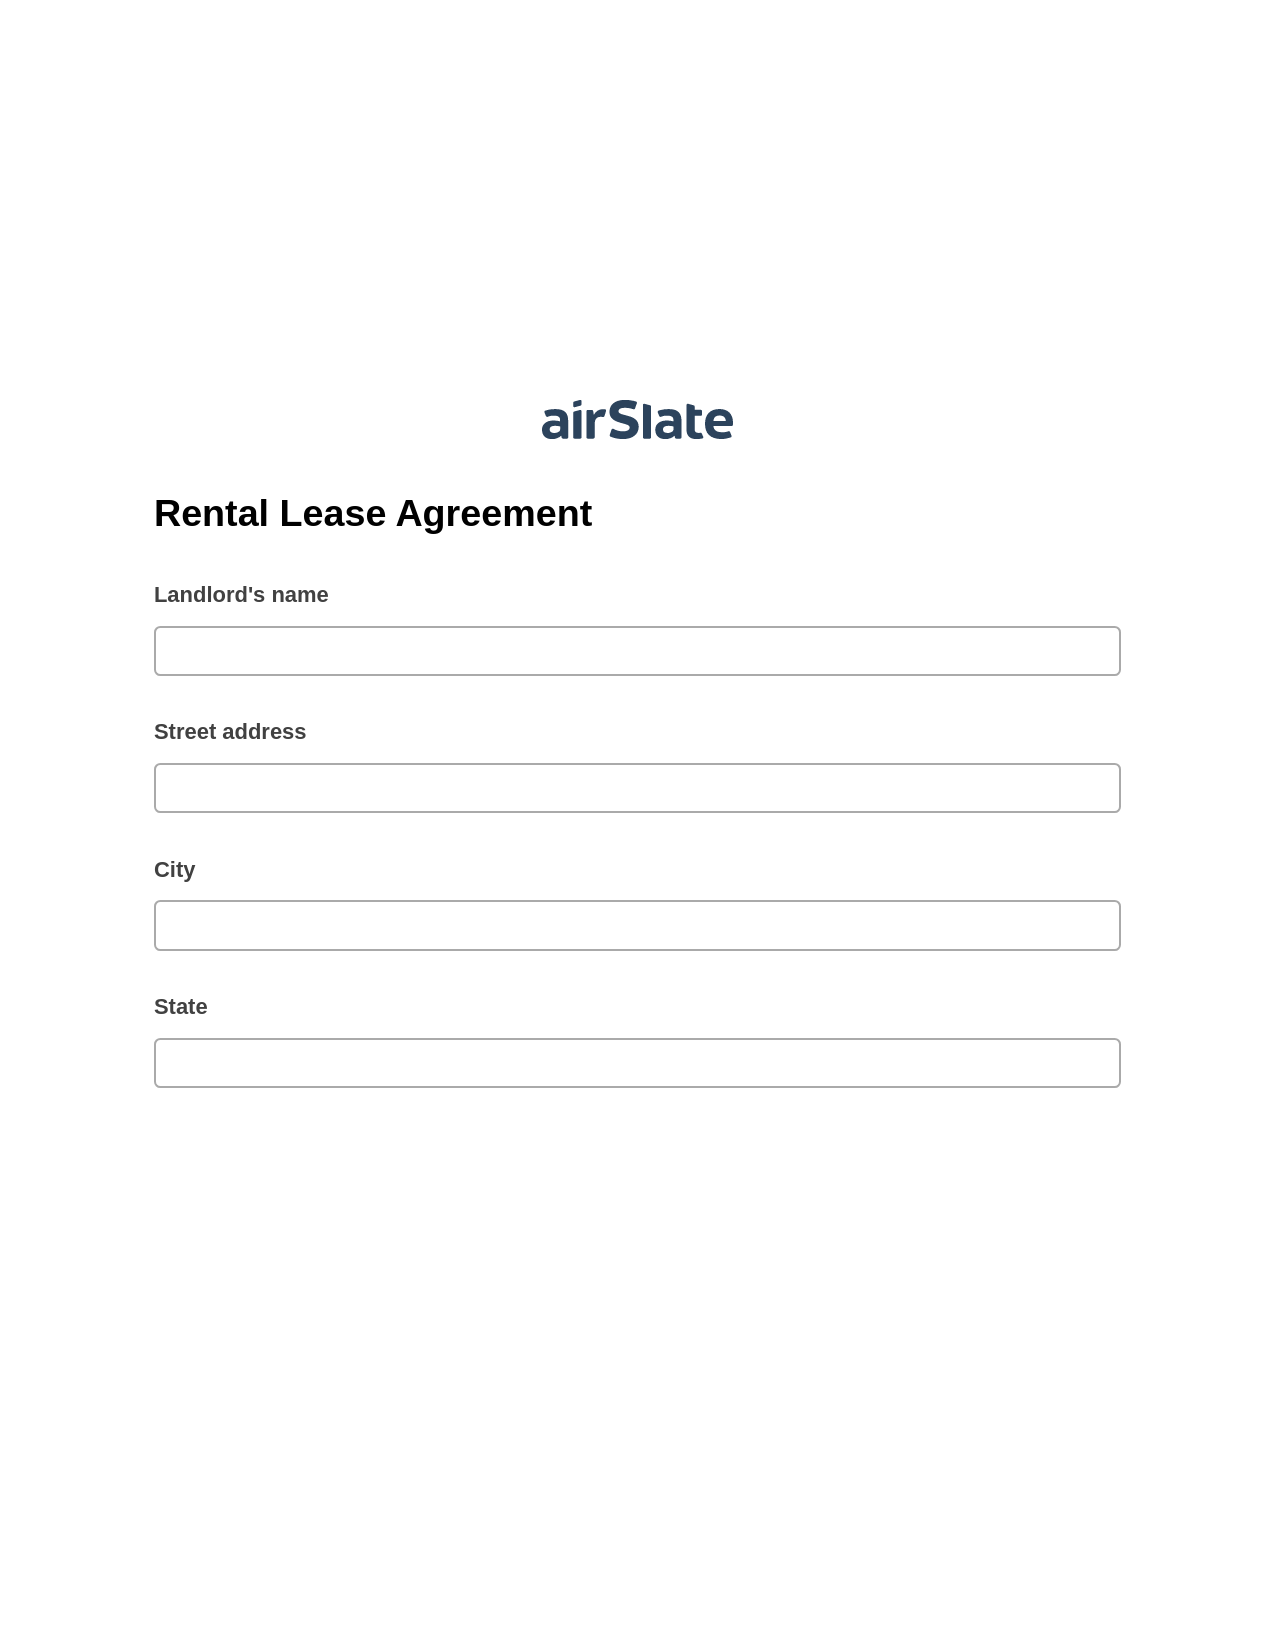 Rental Lease Agreement Pre-fill from Salesforce Record Bot, Google Cloud Print Bot, Export to Excel 365 Bot